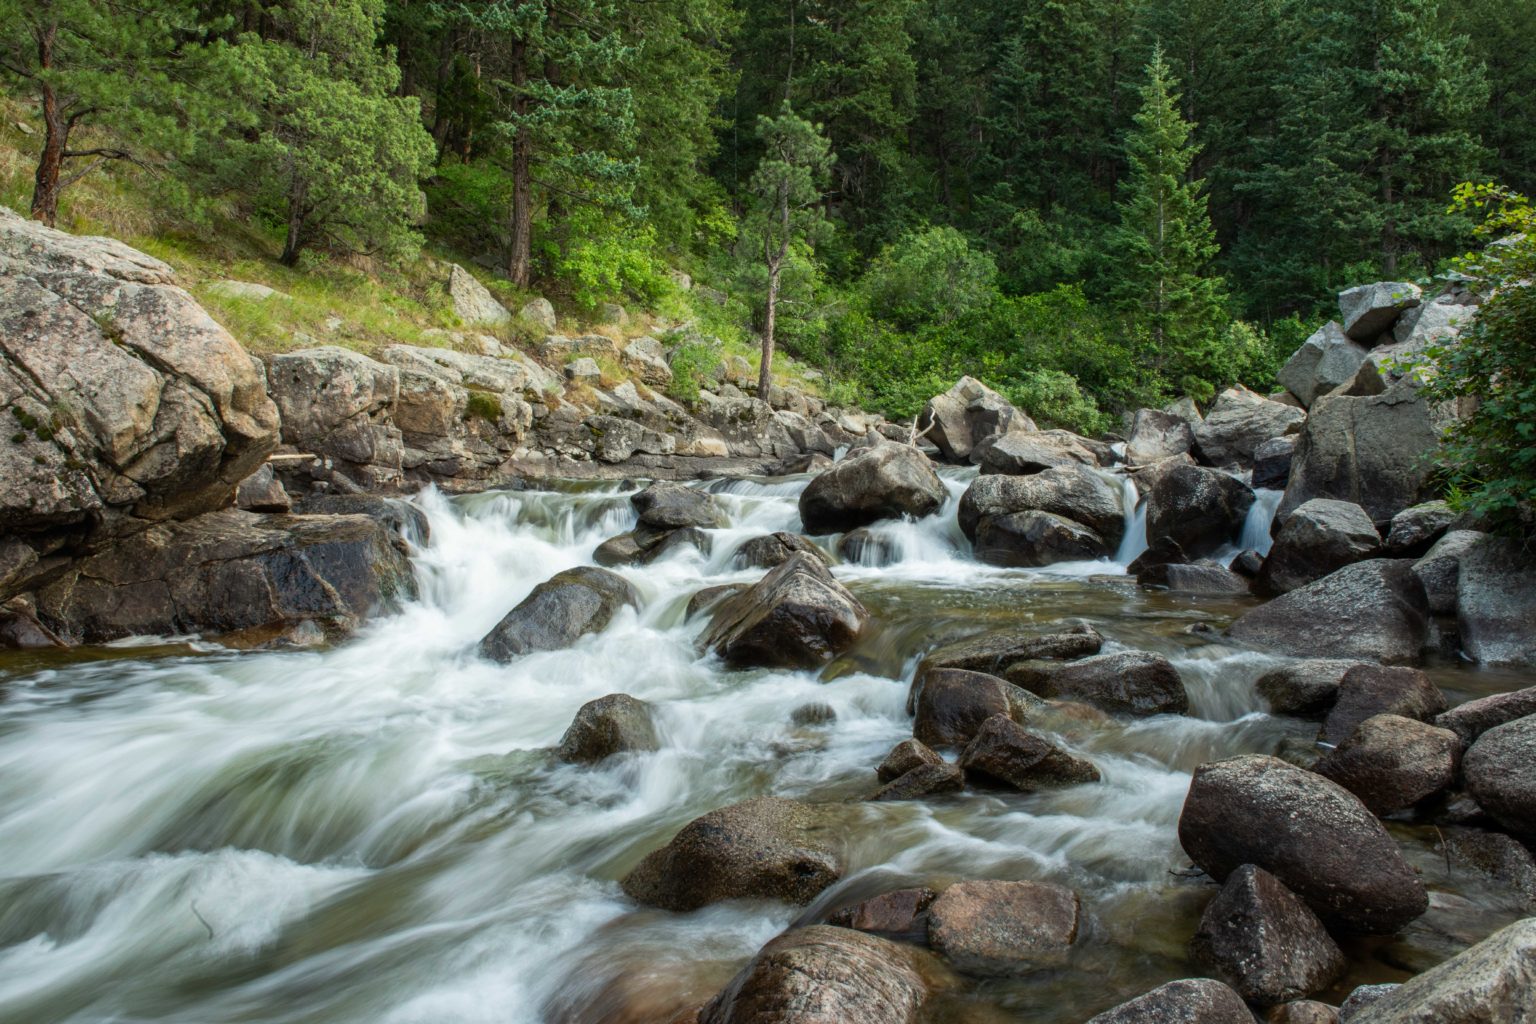 Water flows down a wide creek full of rocks, appearing as a series of small waterfalls.